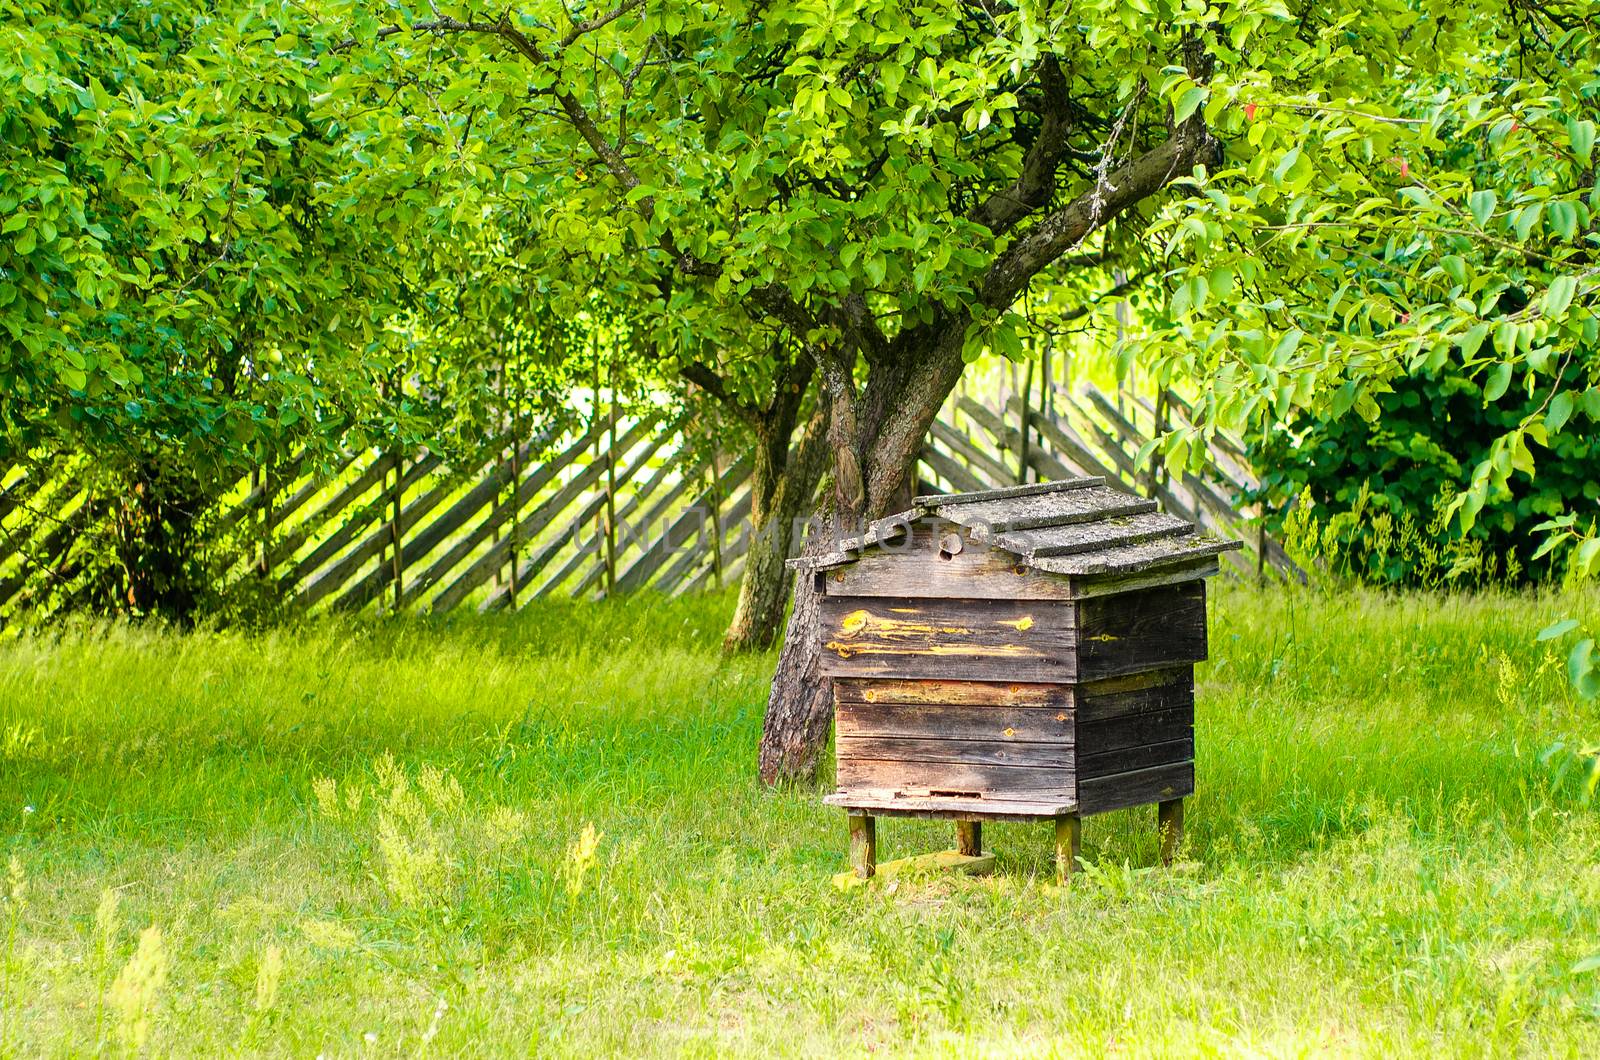 Beehives with bees in a honey farm. Very old, historical beehive in the garden. by KajaNi